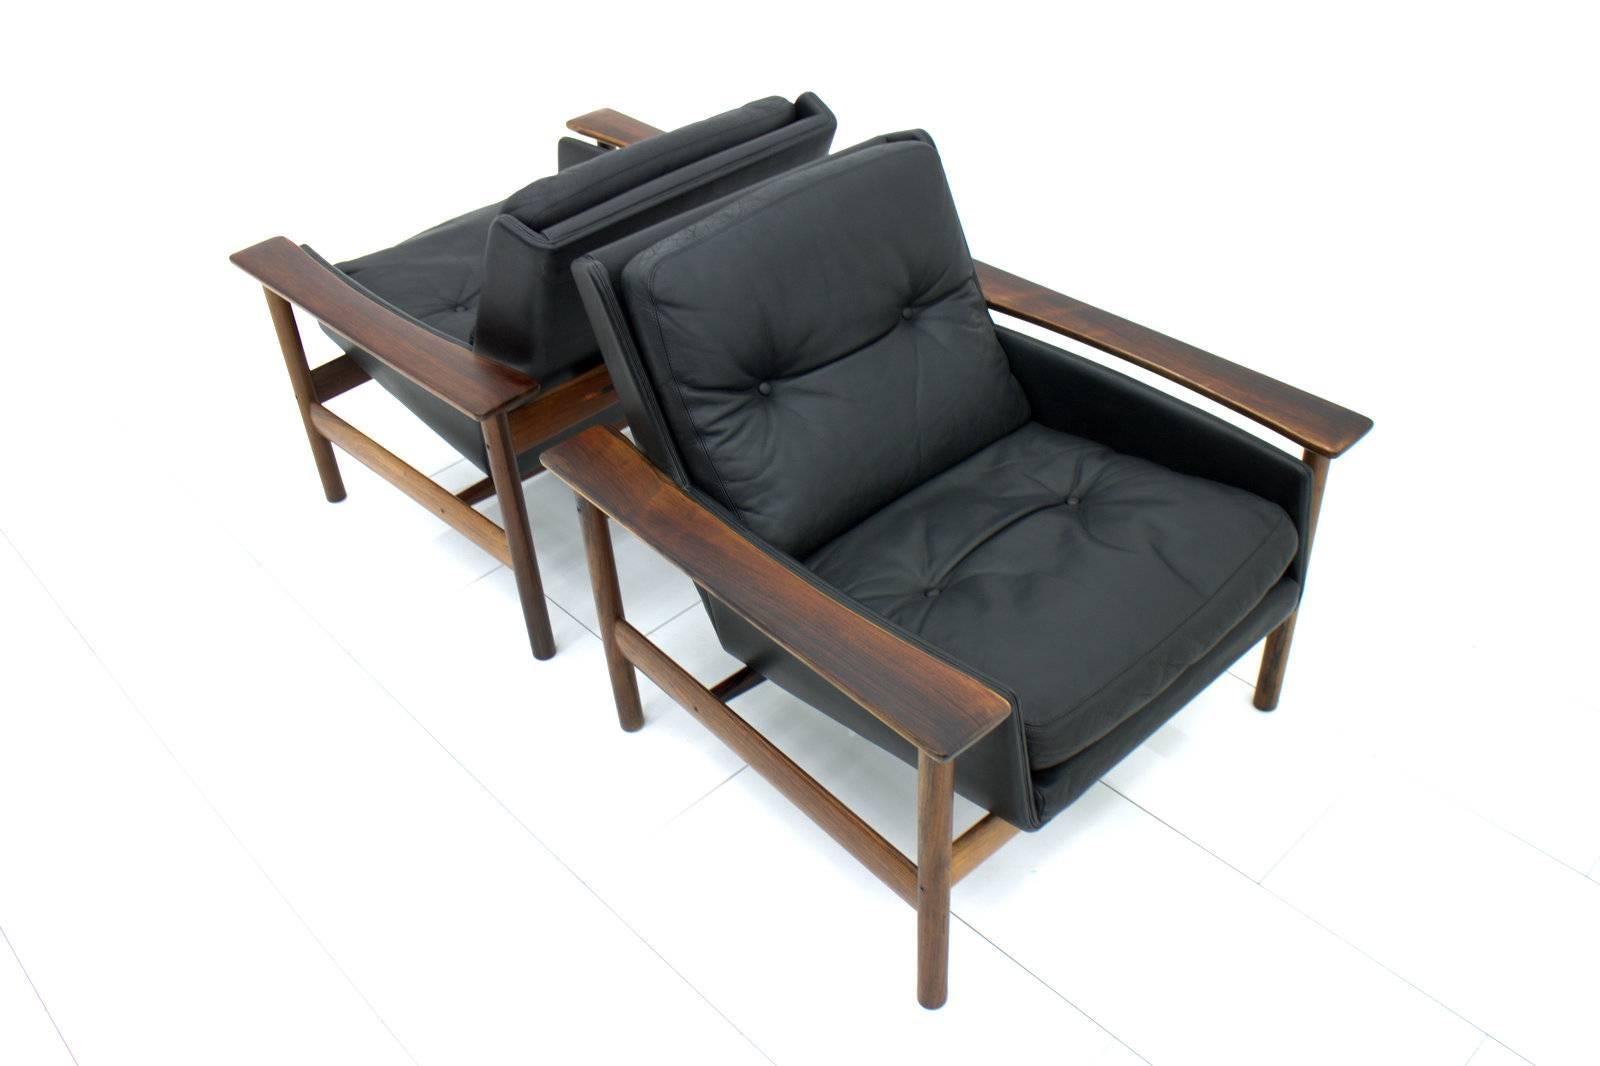 Scandinavian Modern Pair of Rosewood and Leather Lounge Chairs by Sven Ivar Dysthe for Dokka